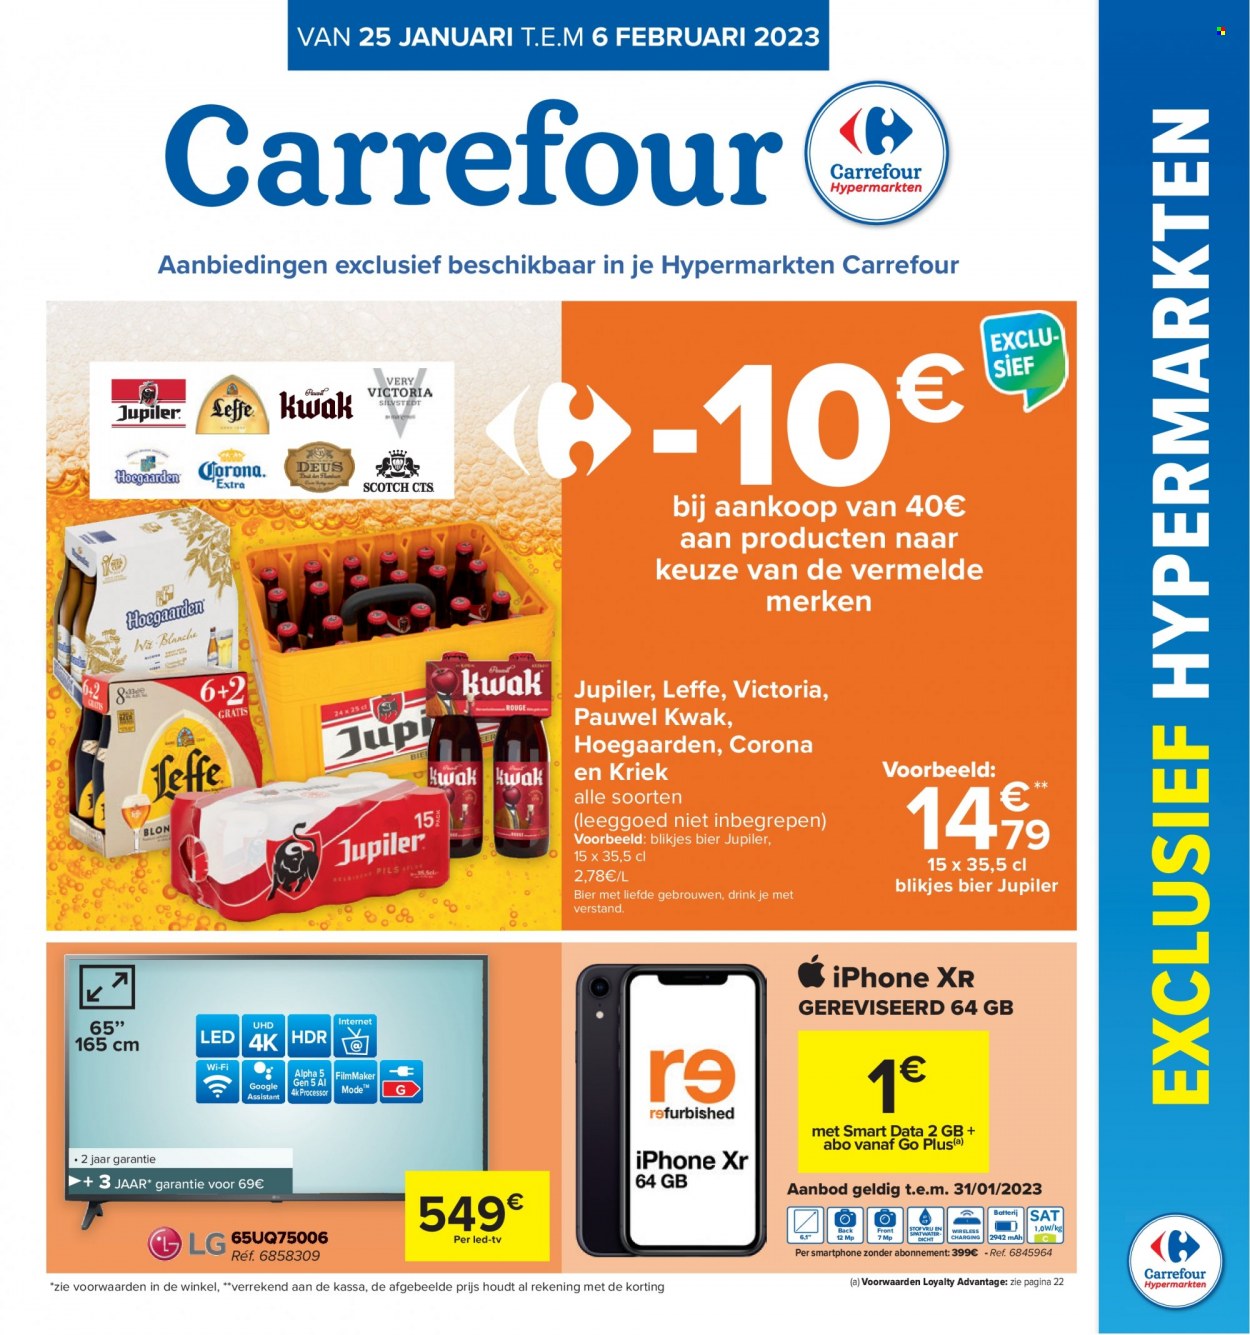 Catalogue Carrefour hypermarkt - 25.1.2023 - 6.2.2023. Page 1.